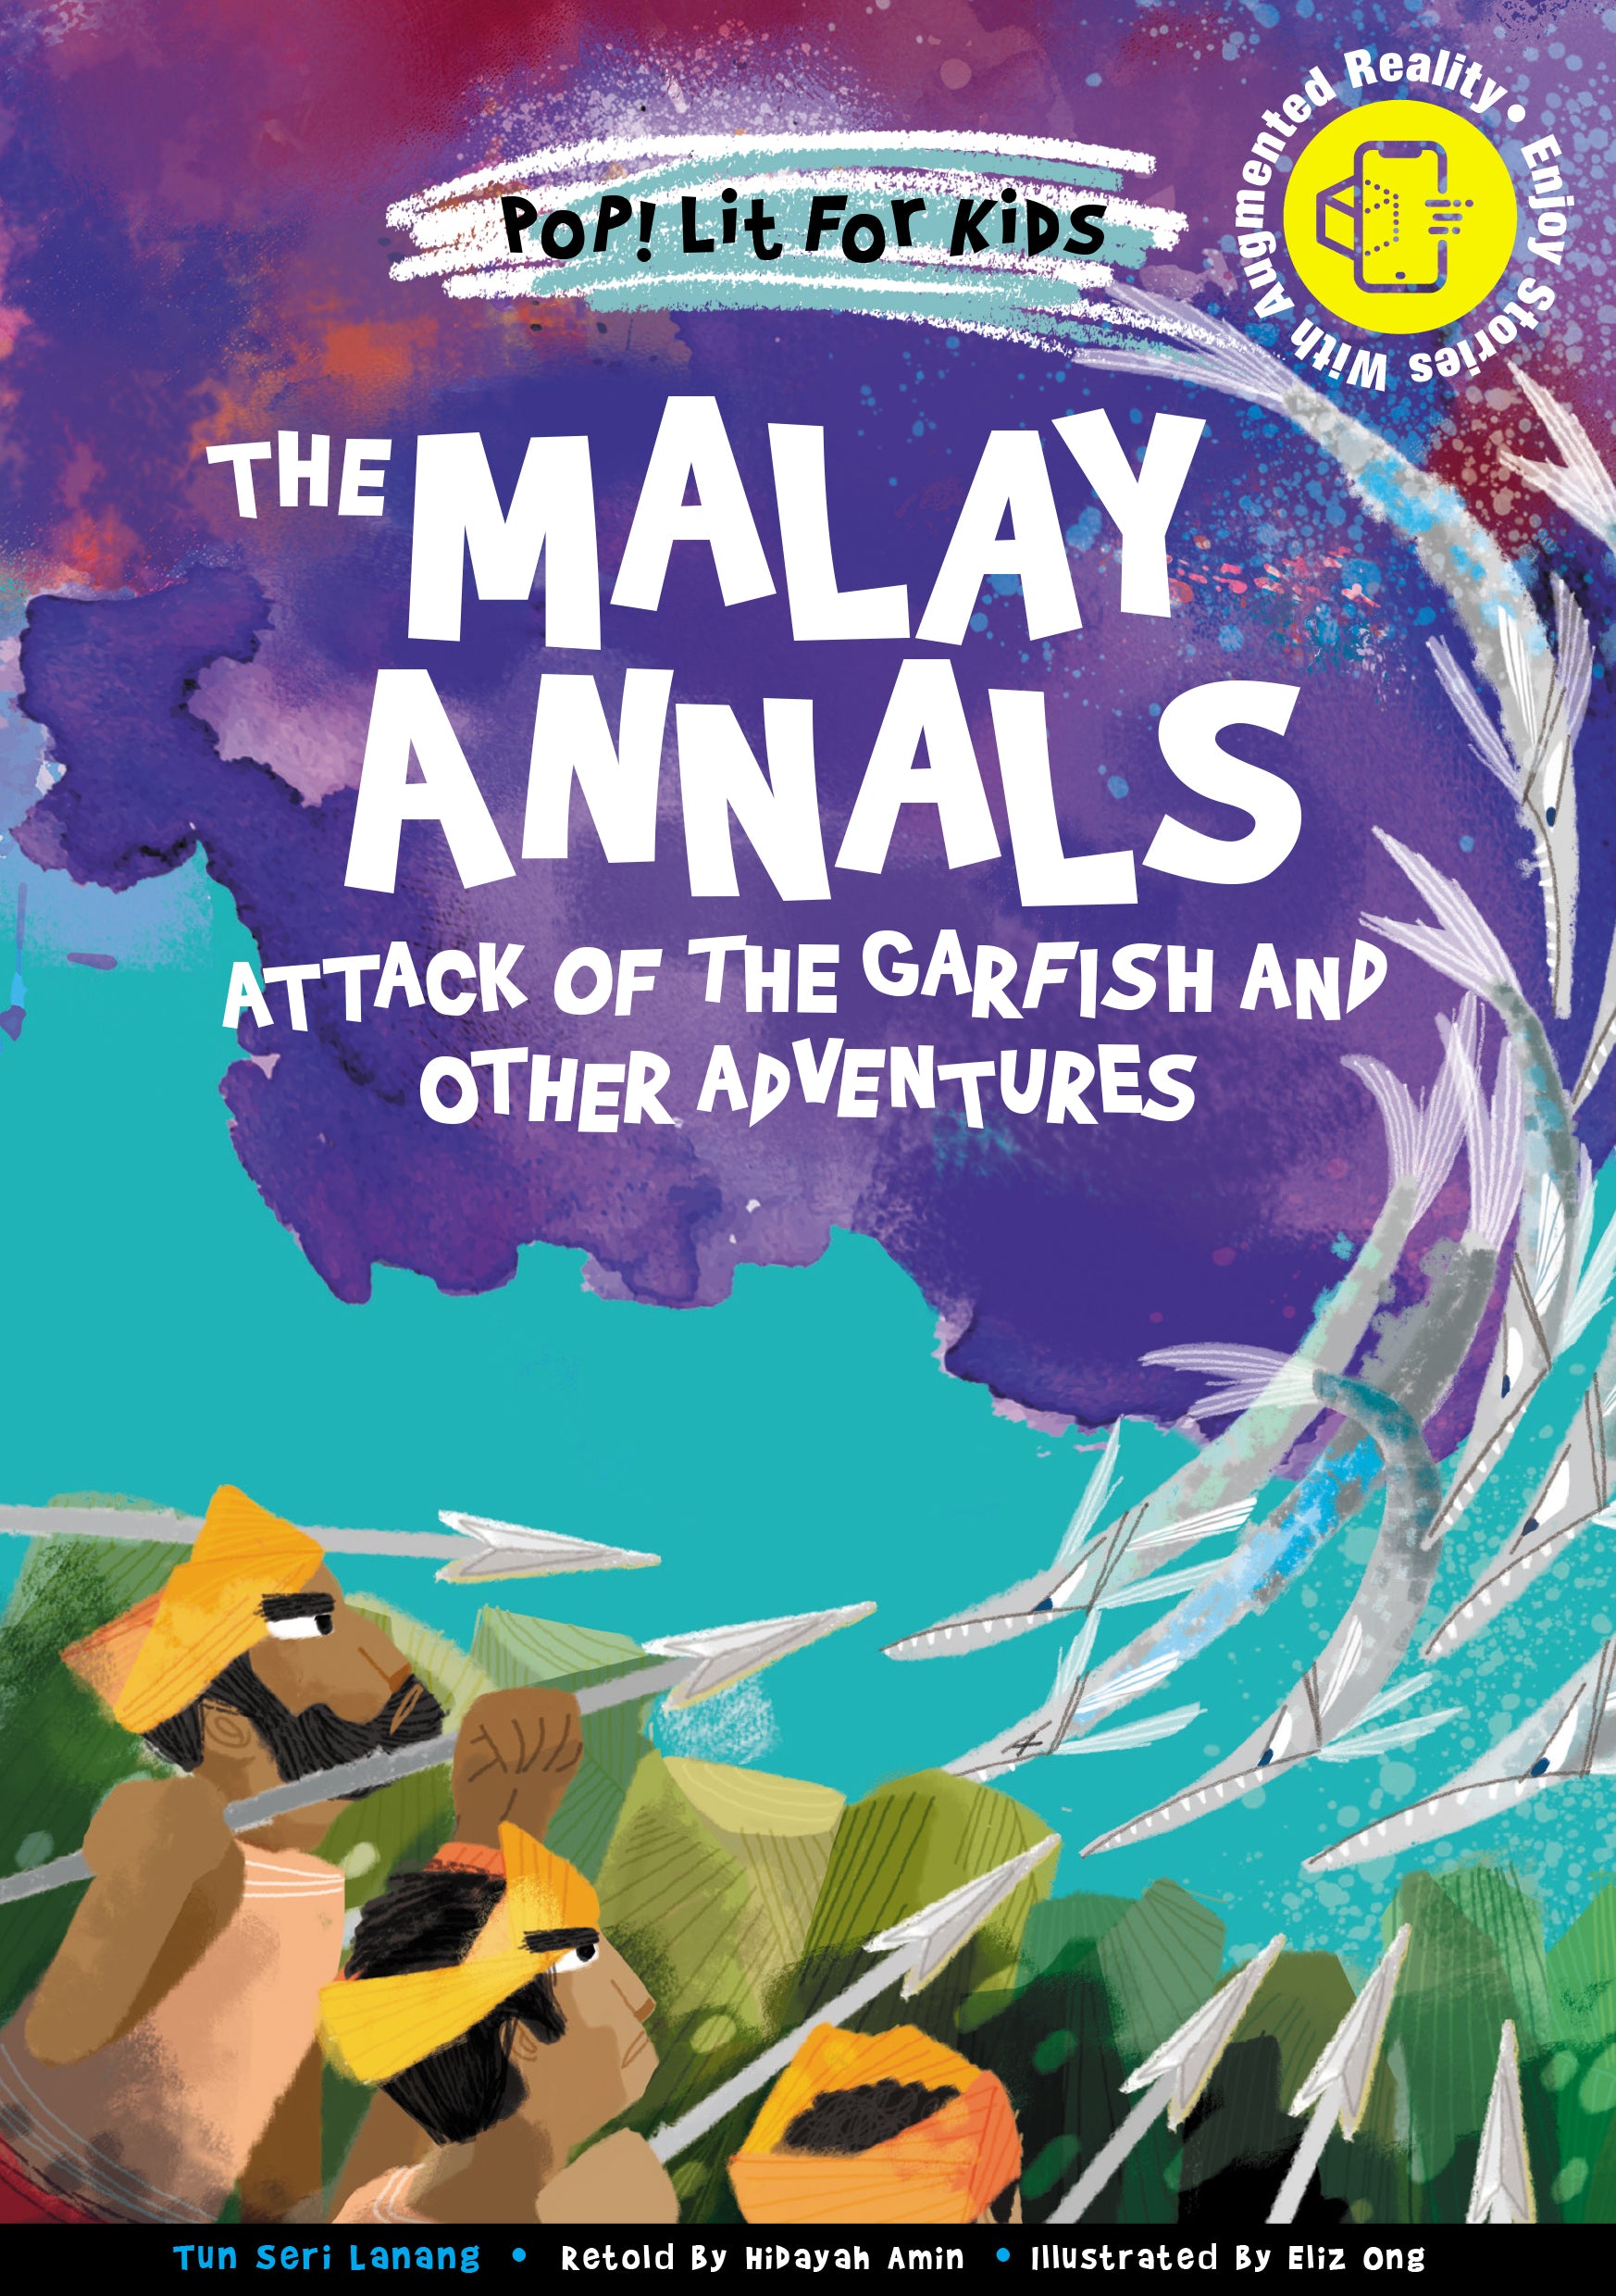 The Malay Annals:  Attack of the Garfish and Other Adventures